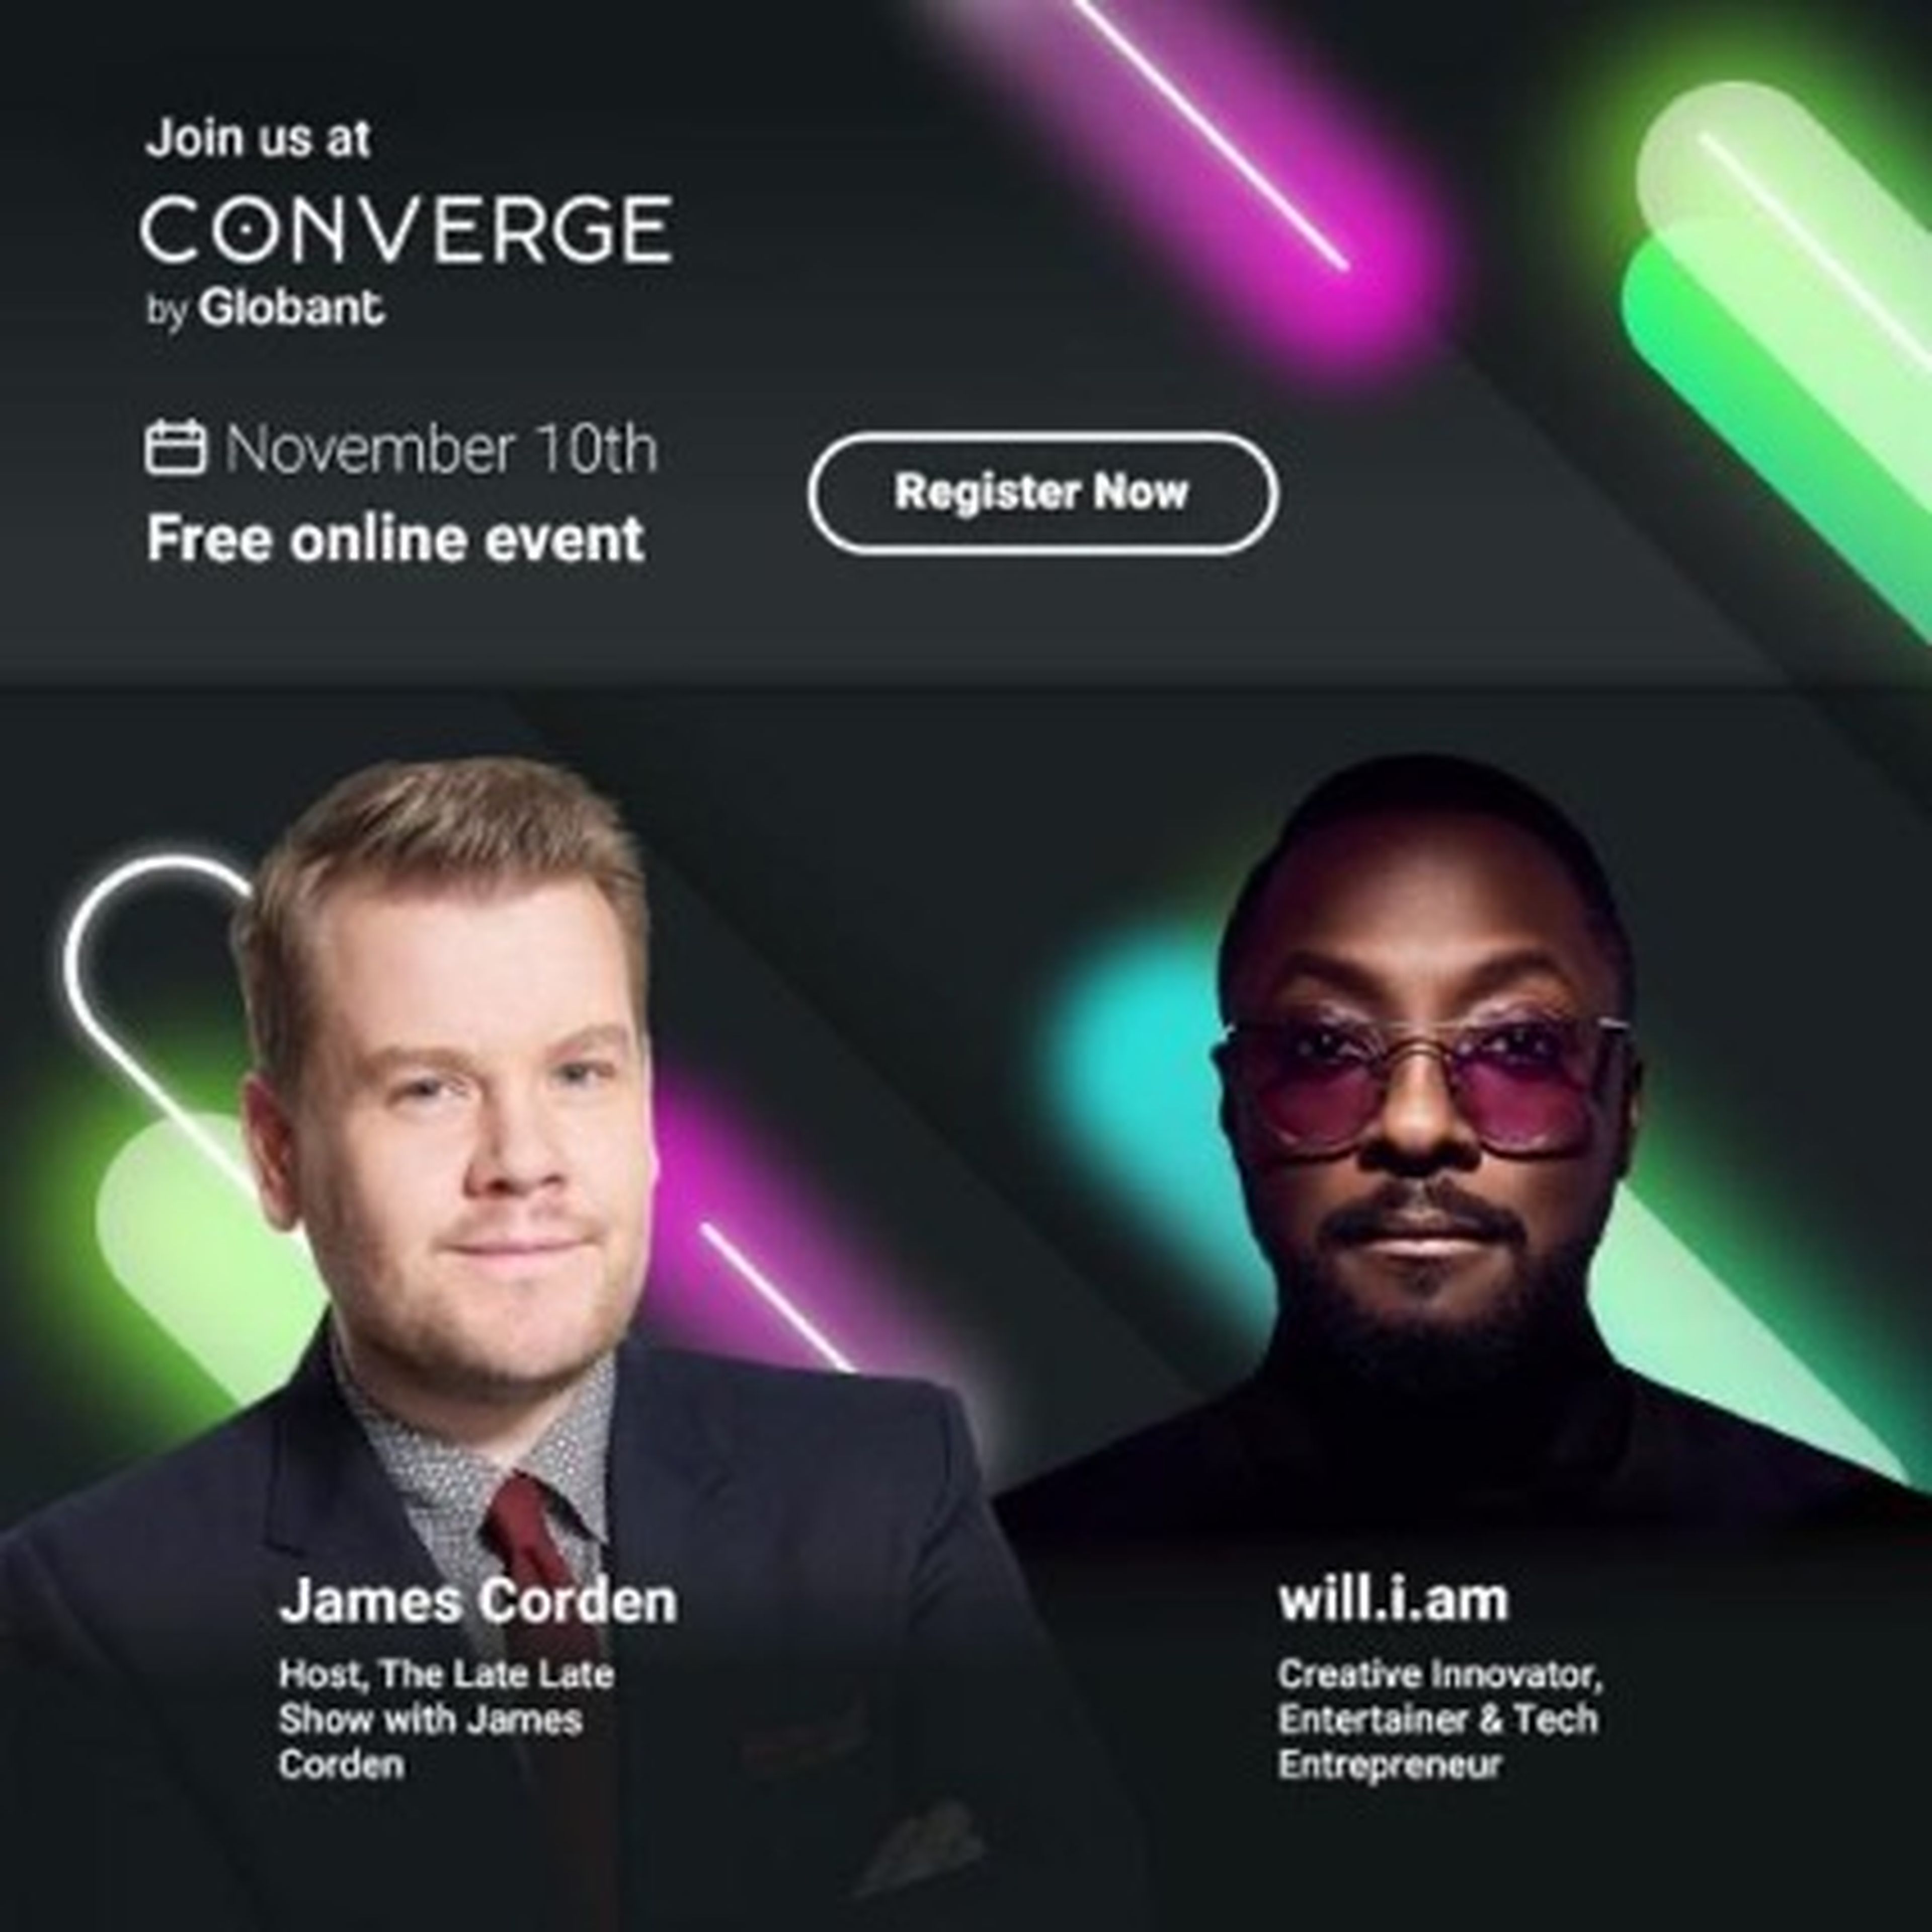 James Corden y Will.i.am, speakers en Converge The Power of Reinvention